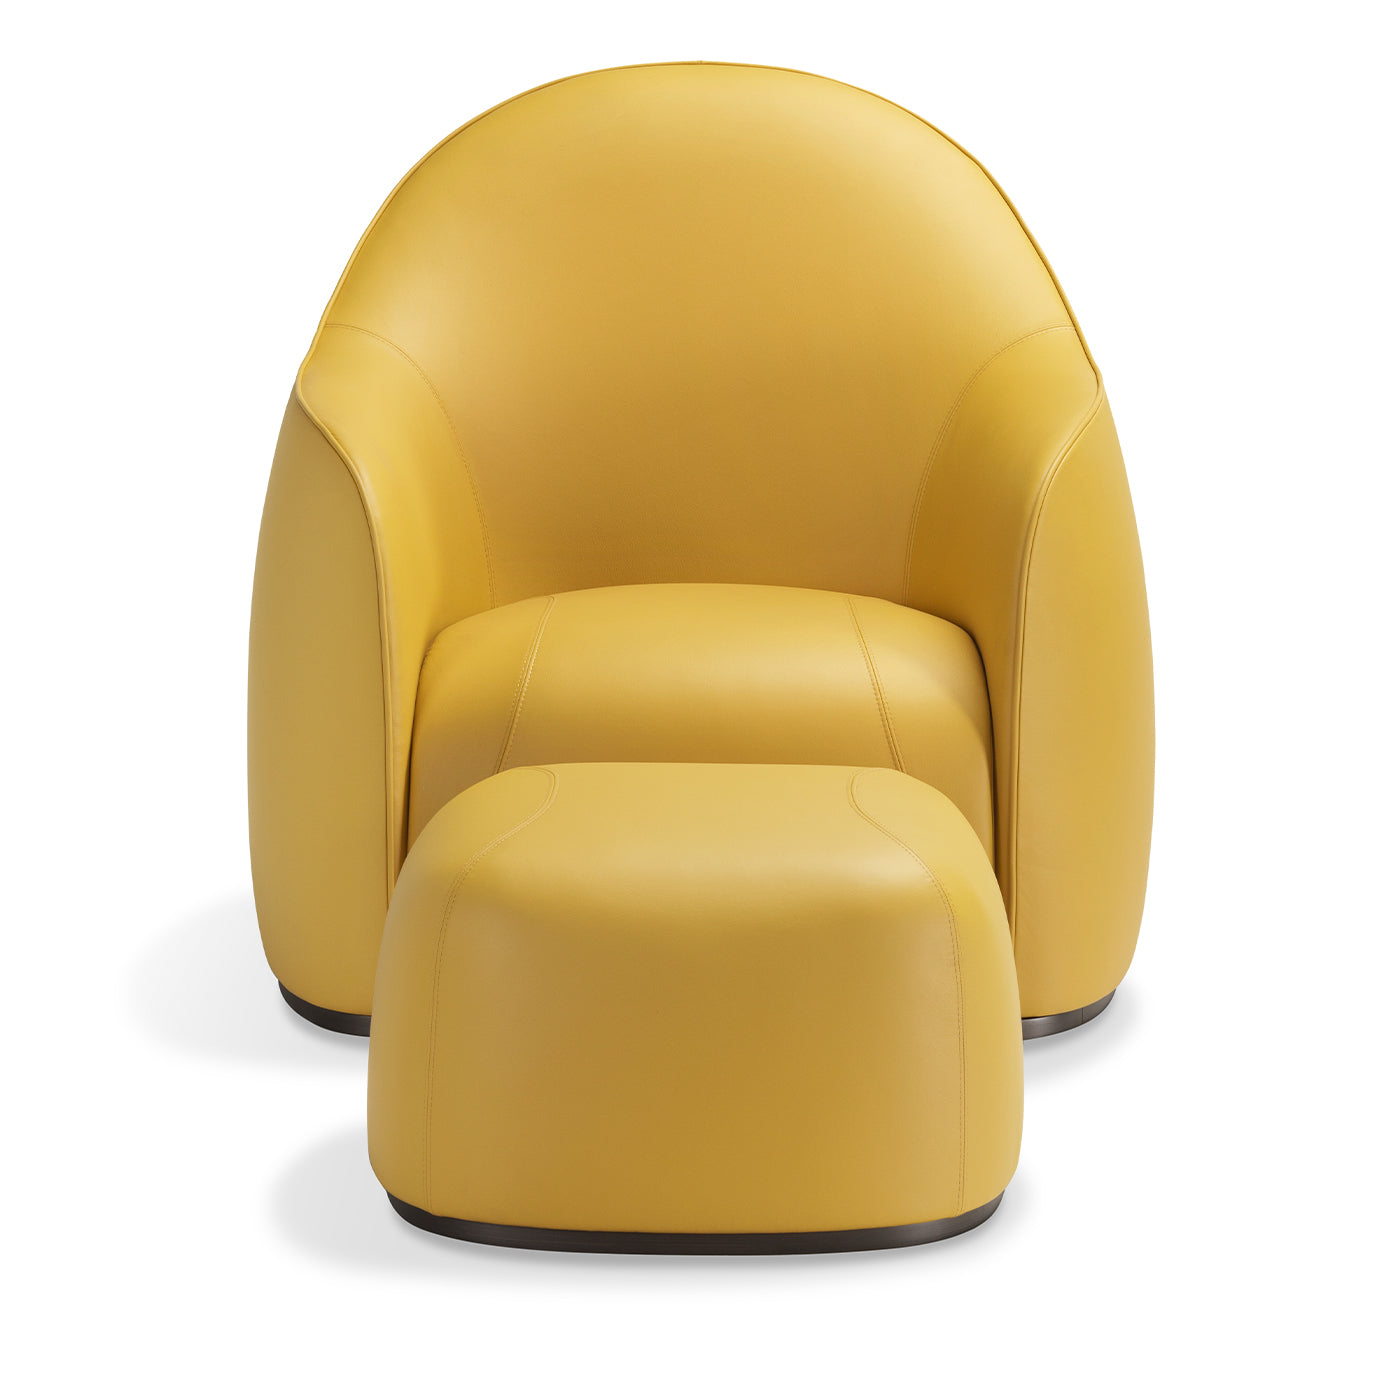 Sweet Set of Mustard Armchair and Pouf by Elisa Giovannoni - Alternative view 1